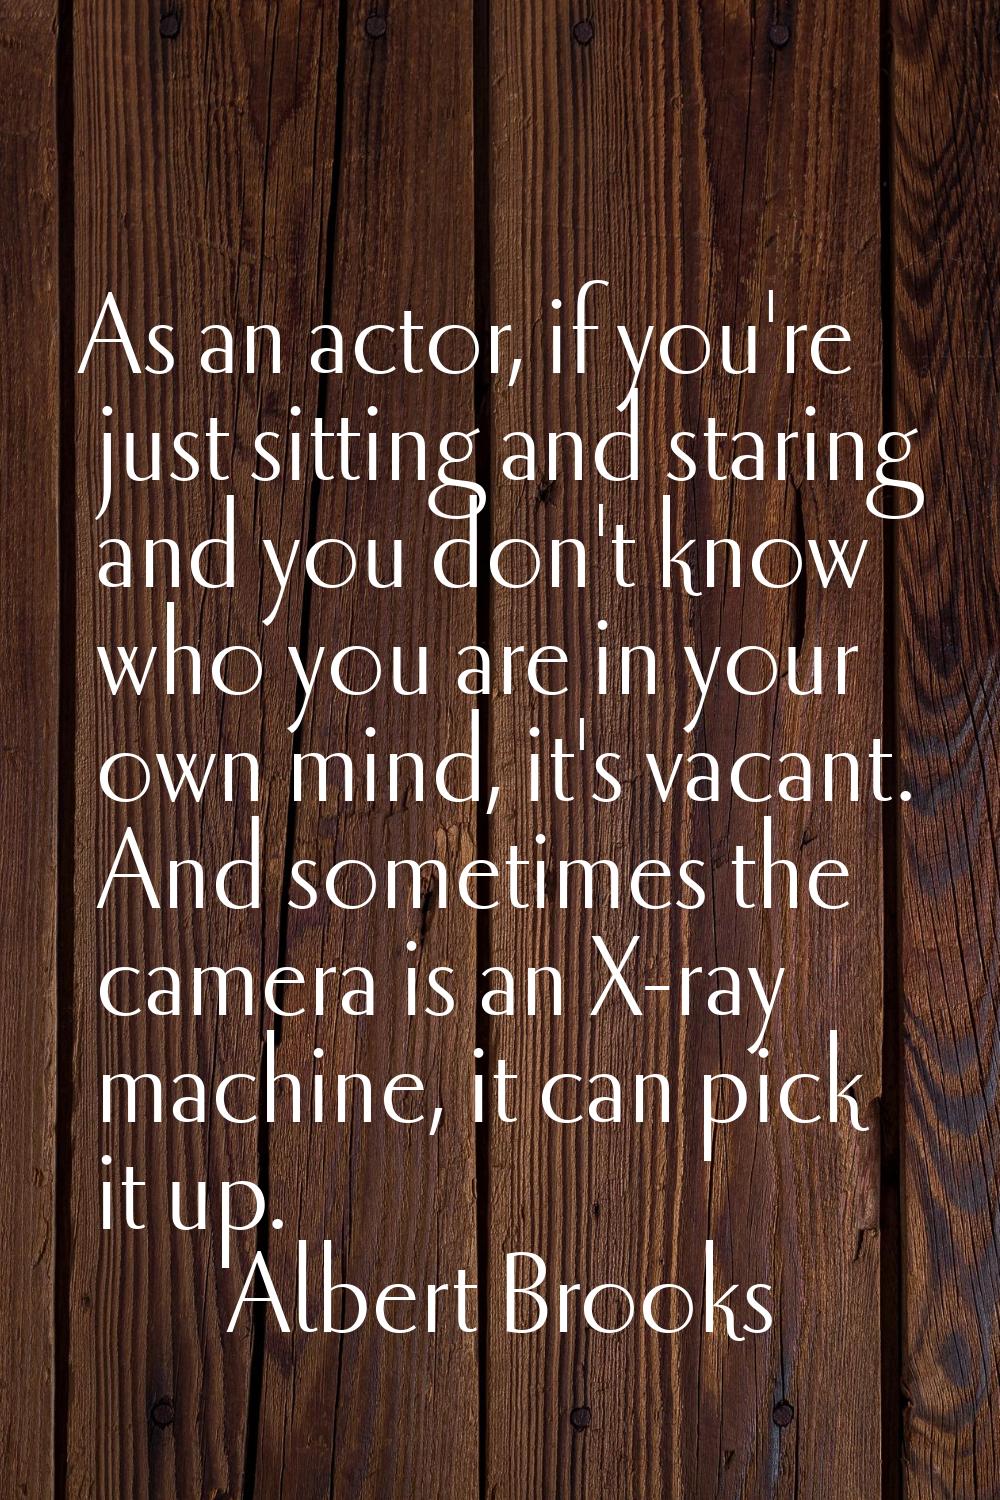 As an actor, if you're just sitting and staring and you don't know who you are in your own mind, it